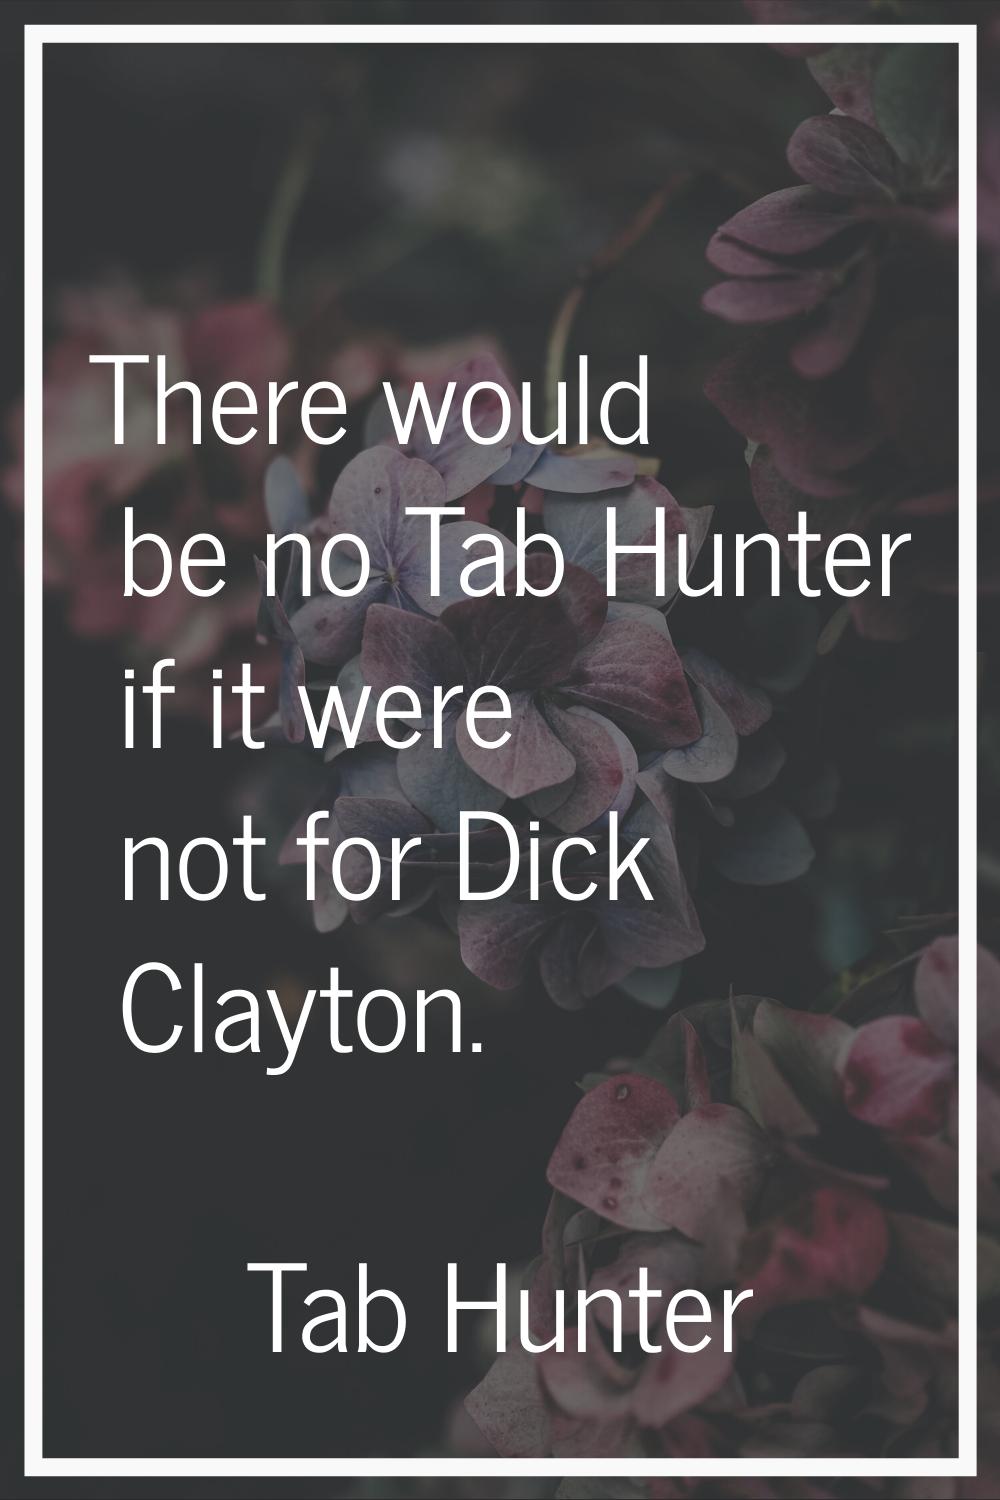 There would be no Tab Hunter if it were not for Dick Clayton.